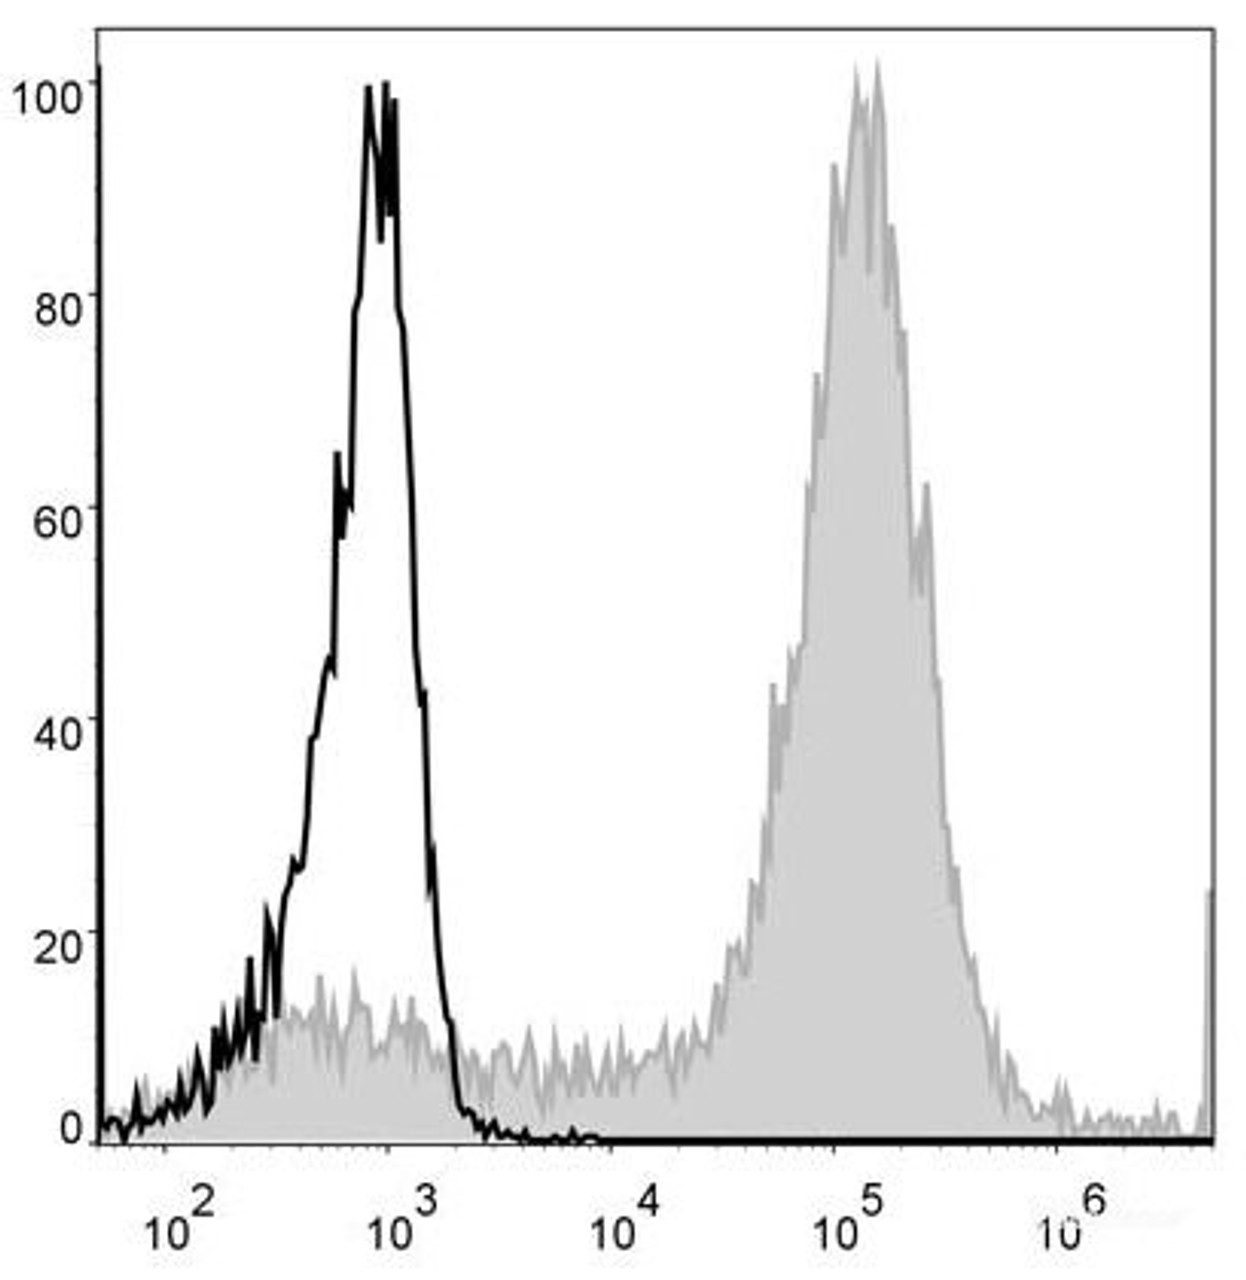 Mouse bone marrow cells are stained with PE Anti-Mouse/Human CD11b Antibody[Used at .2 μg/1<sup>6</sup> cells dilution](filled gray histogram). Unstained bone marrow cells (blank black histogram) are used as control.